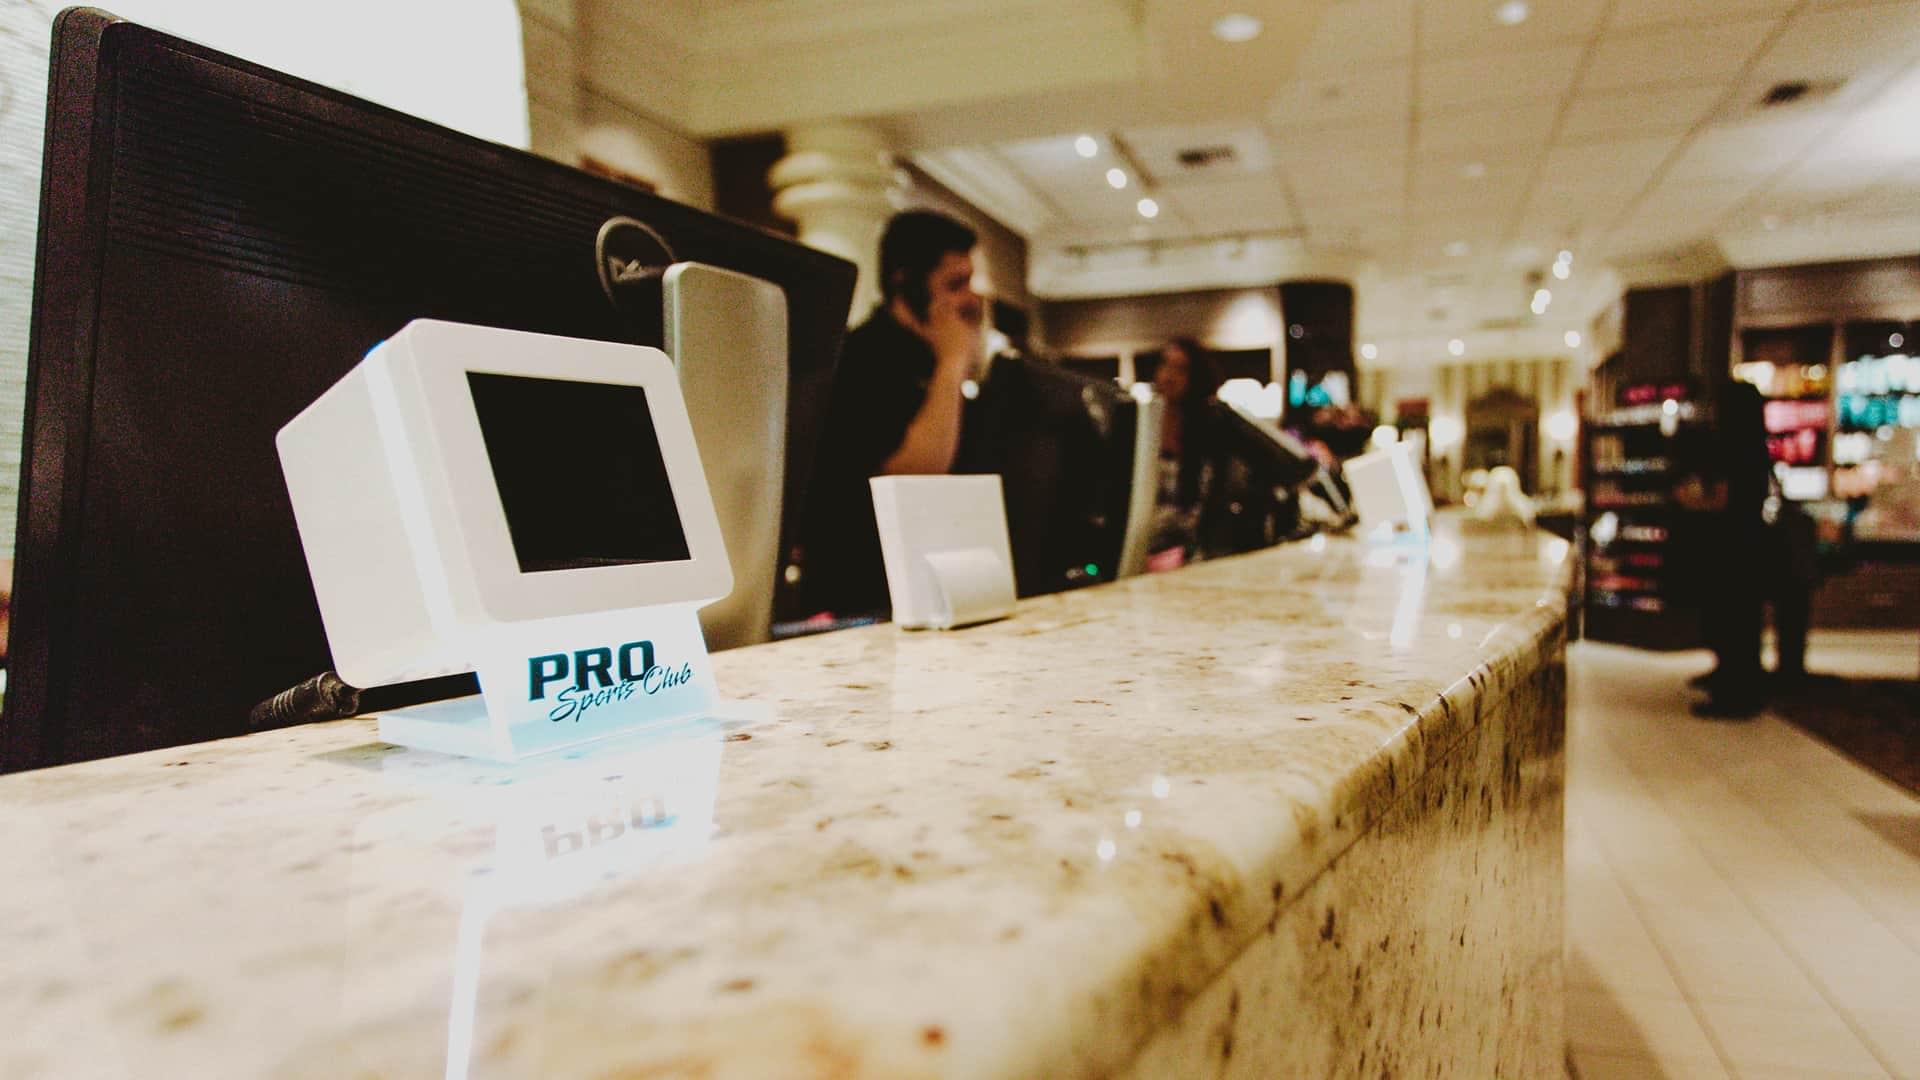 The Front Desk at the PRO Club Spa